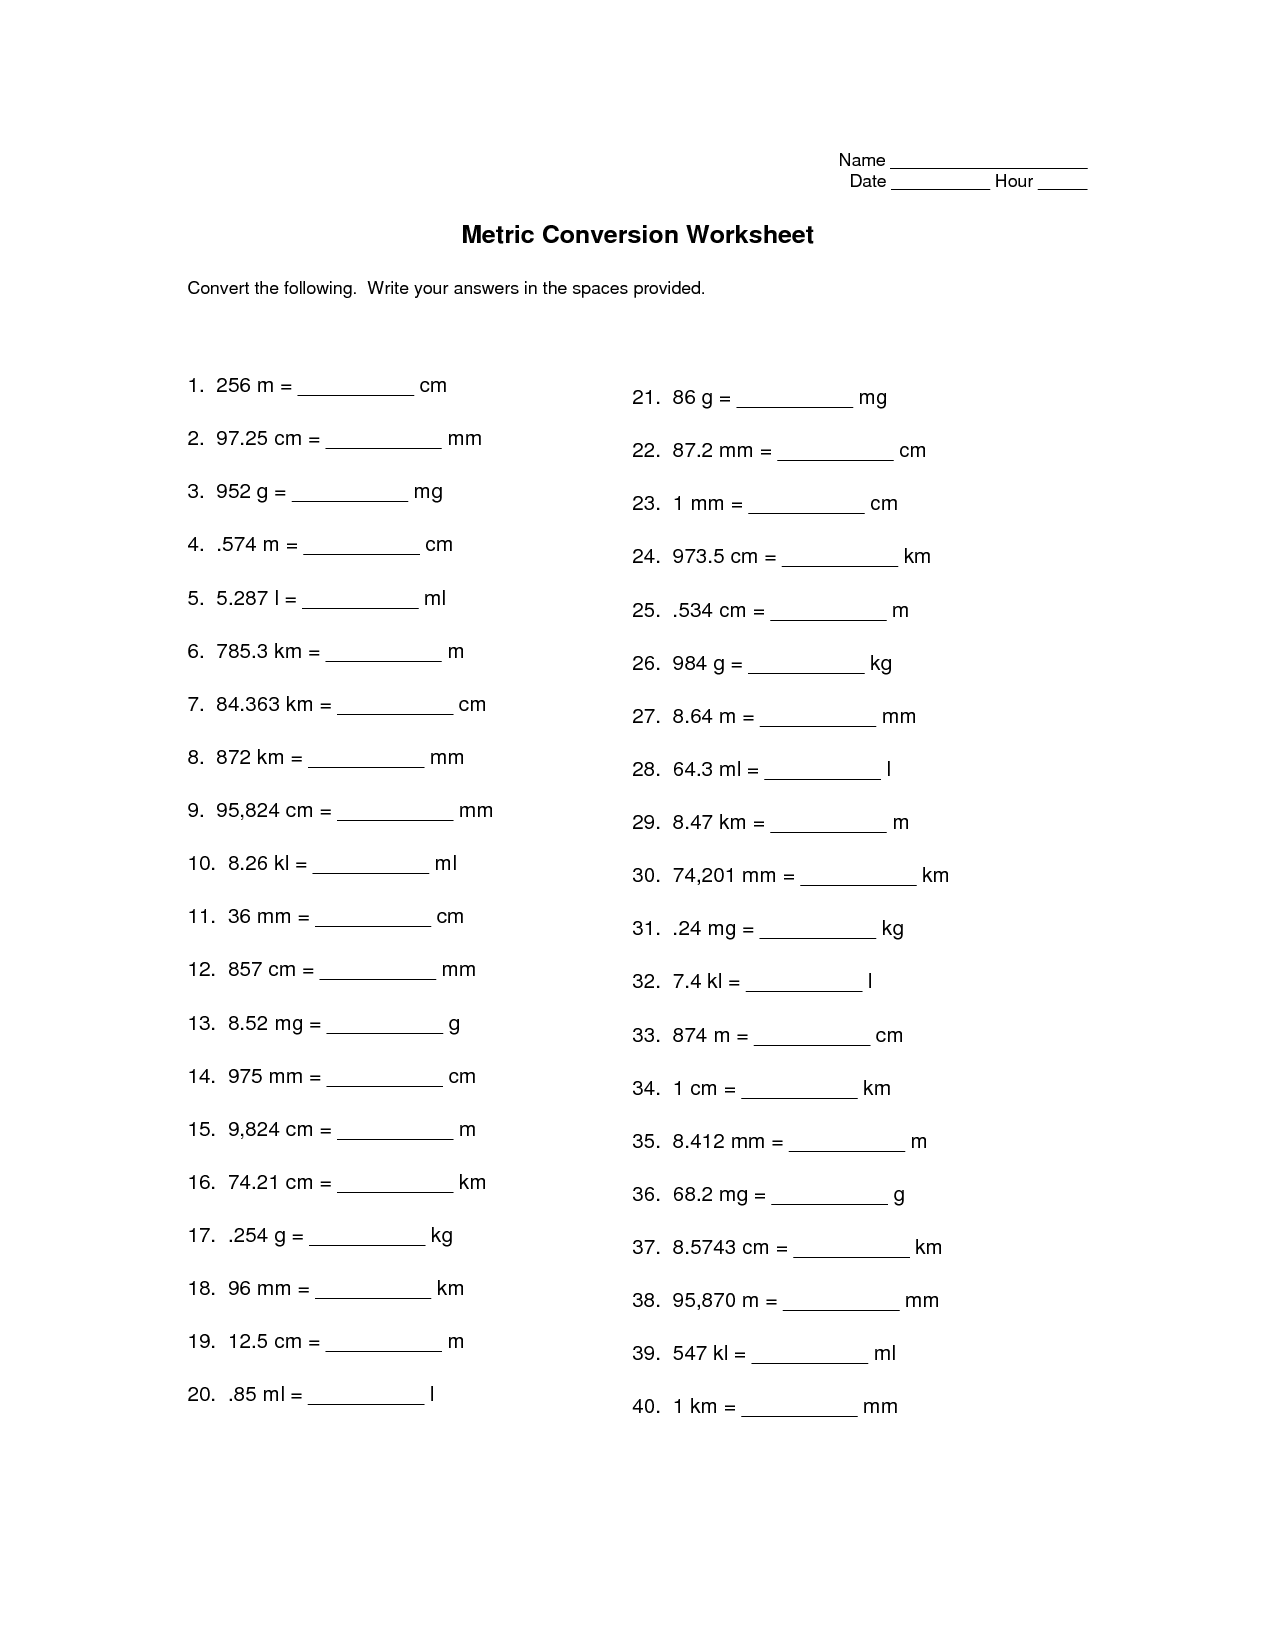 Conversion Worksheet Answers